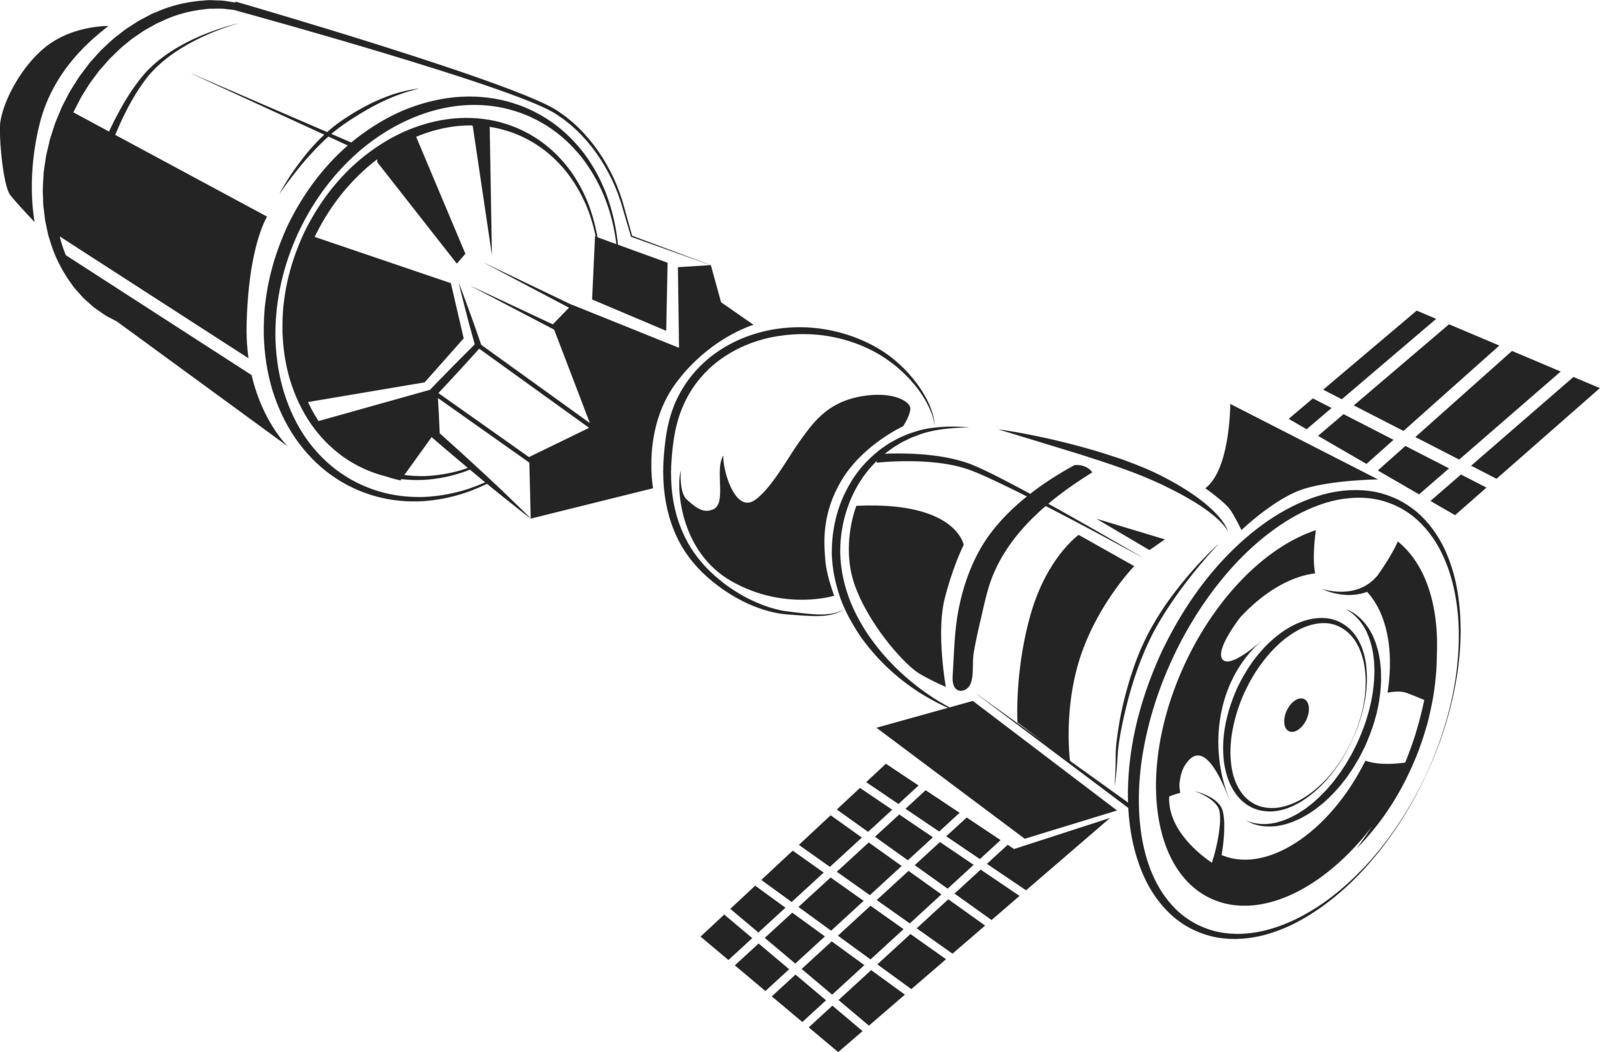 Satellite icon. Artificial orbital ship. Spacecraft symbol by MicroOne